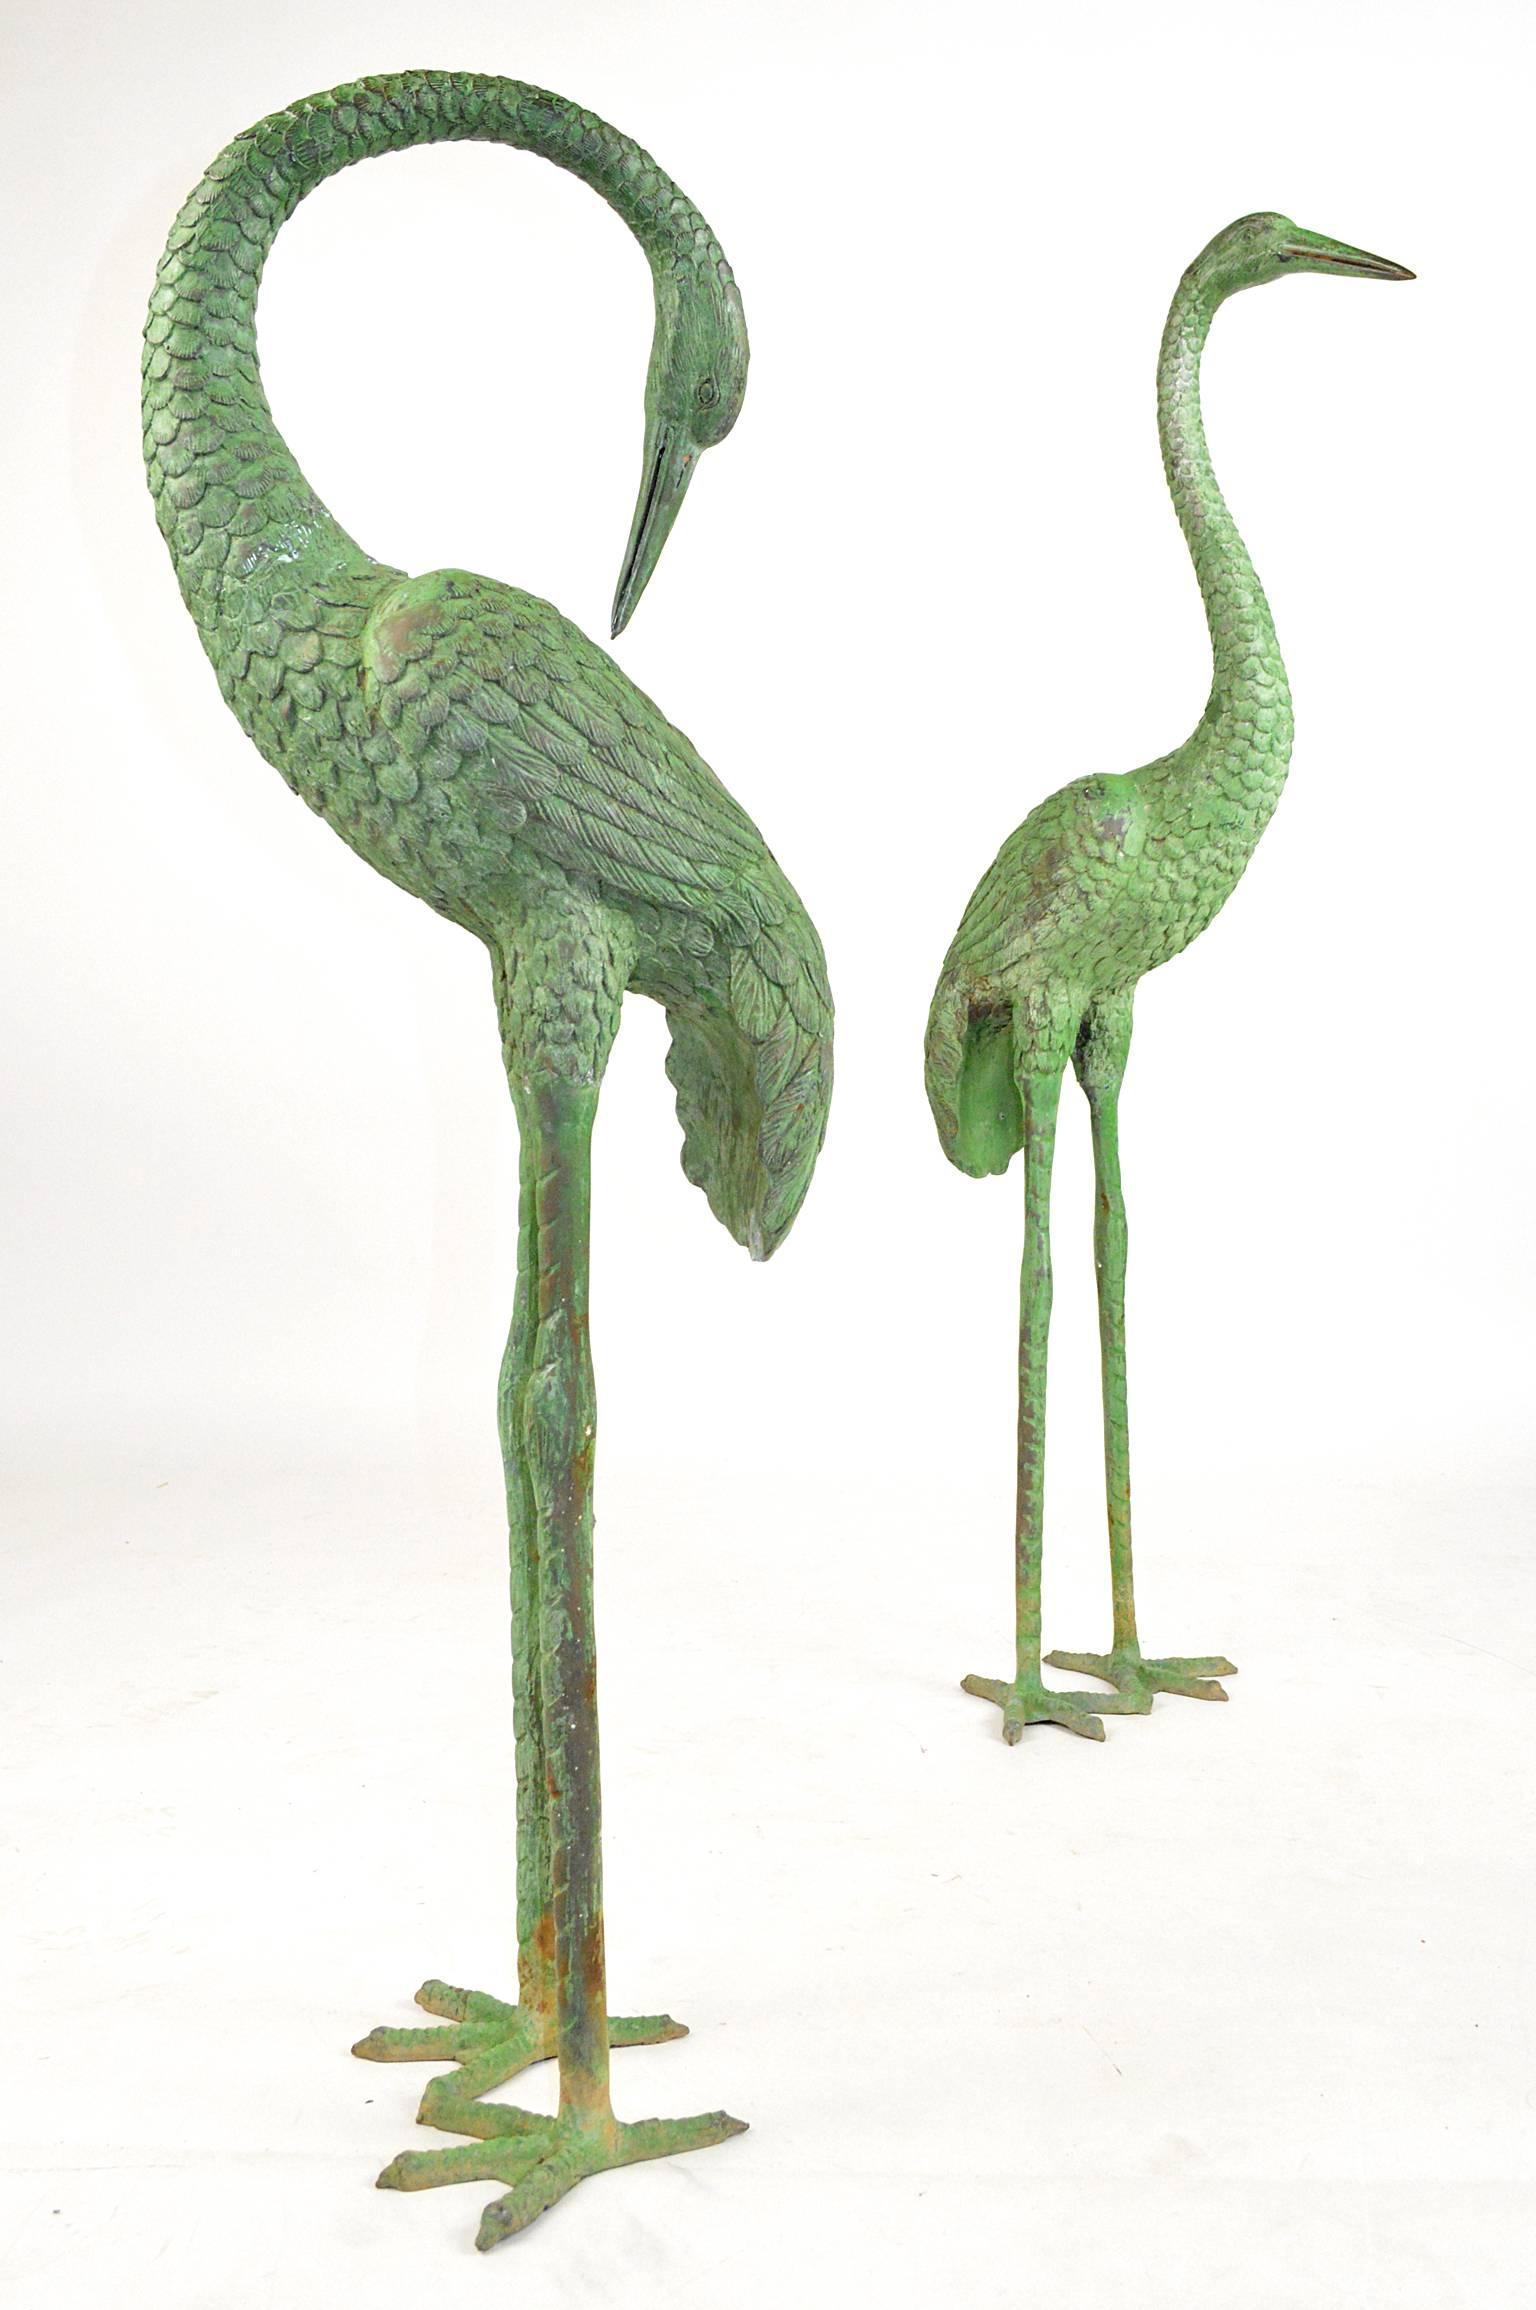 Pair of patinated bronze garden cranes with a nice even natural patina.
Shortest measures 37